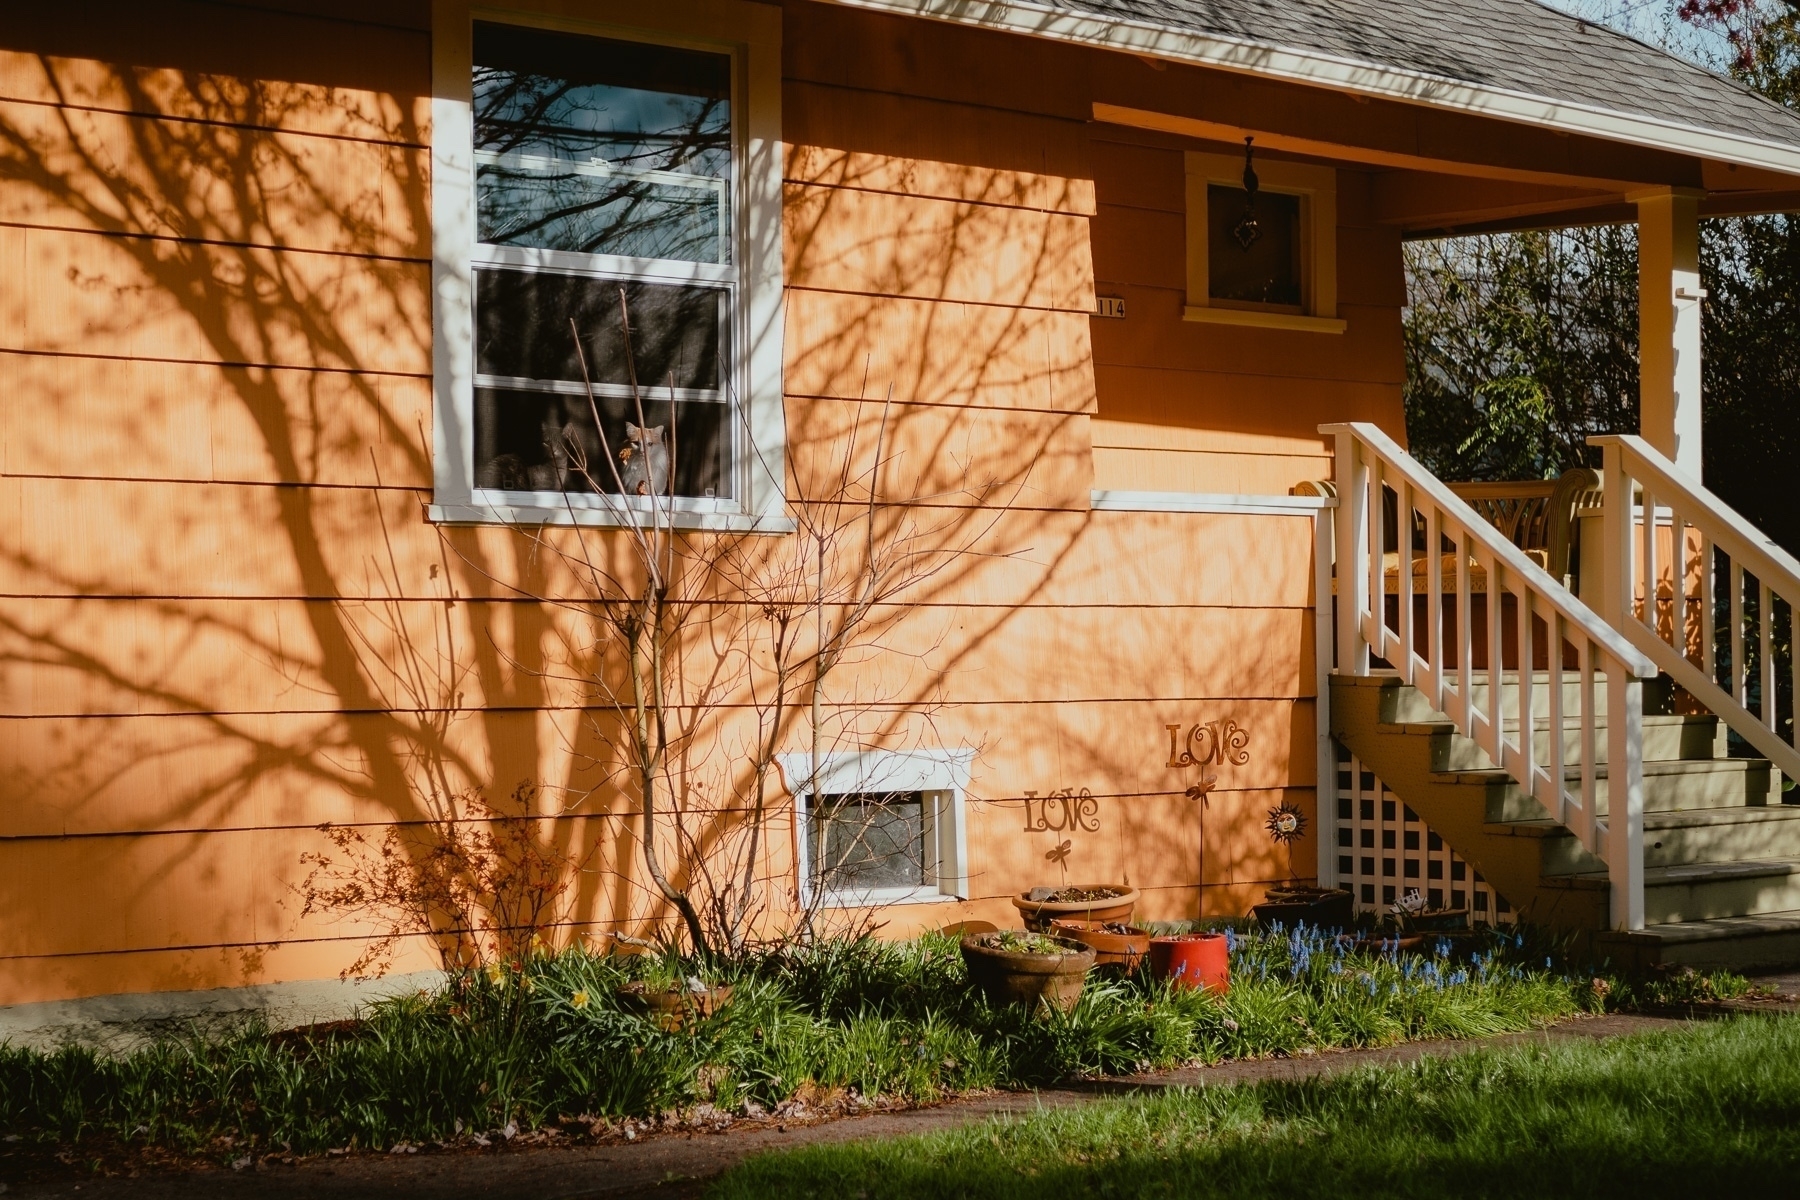 Sidewalk view of a bright orange house with the shadow of tree branches. On a window sit two cats looking at the camera. Two signs on the lawn in front say “Love”.